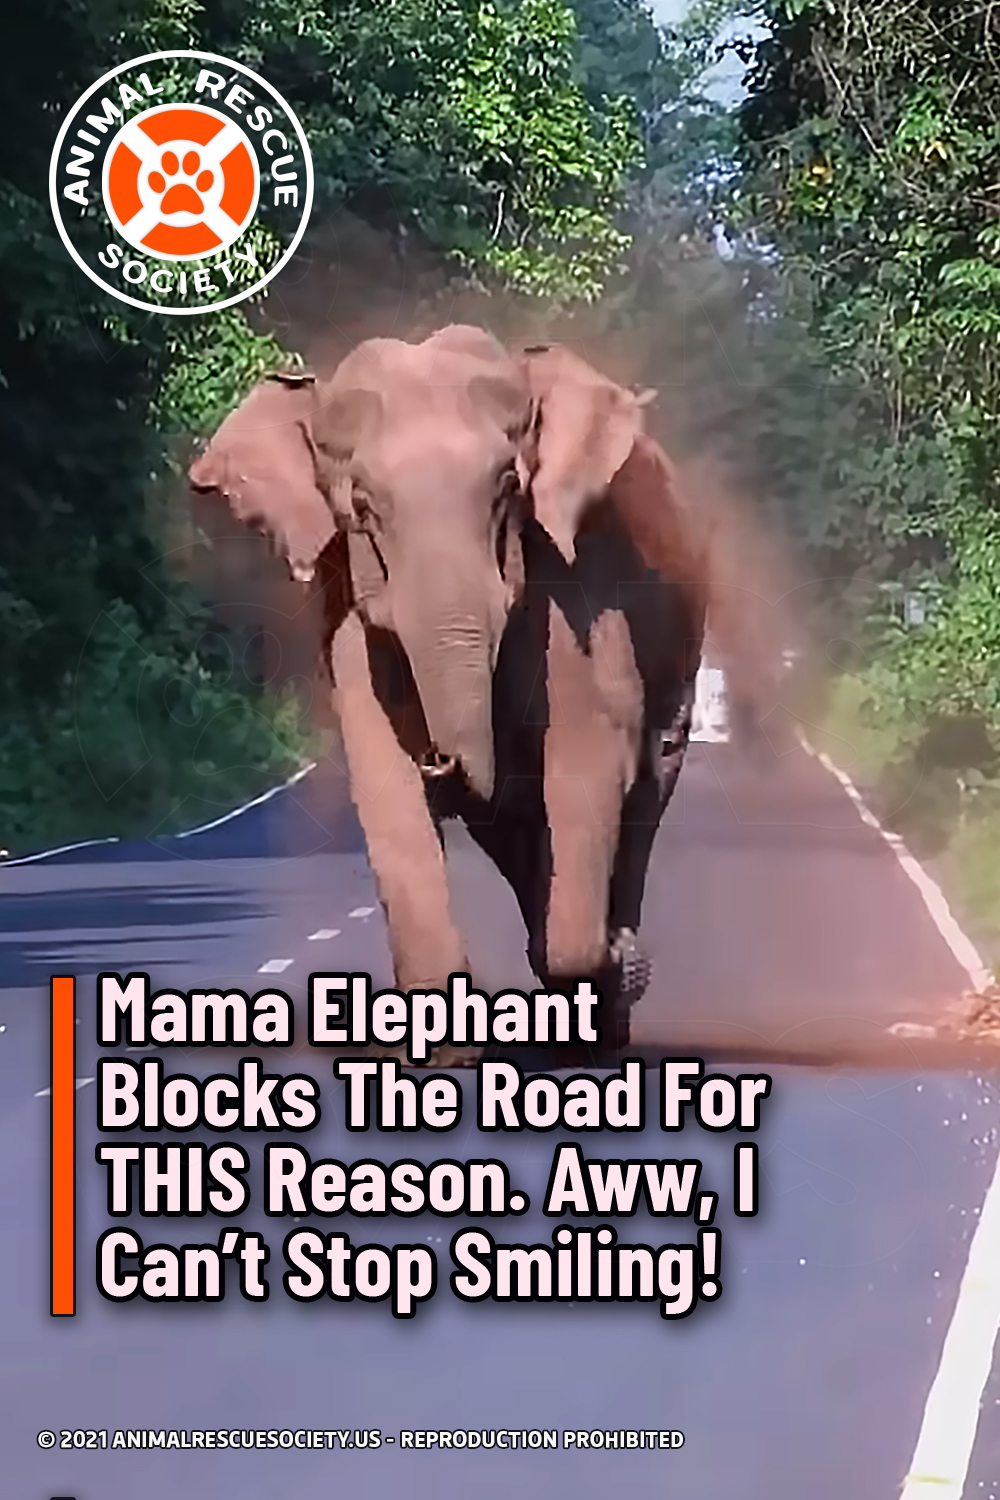 Mama Elephant Blocks The Road For THIS Reason. Aww, I Can’t Stop Smiling!